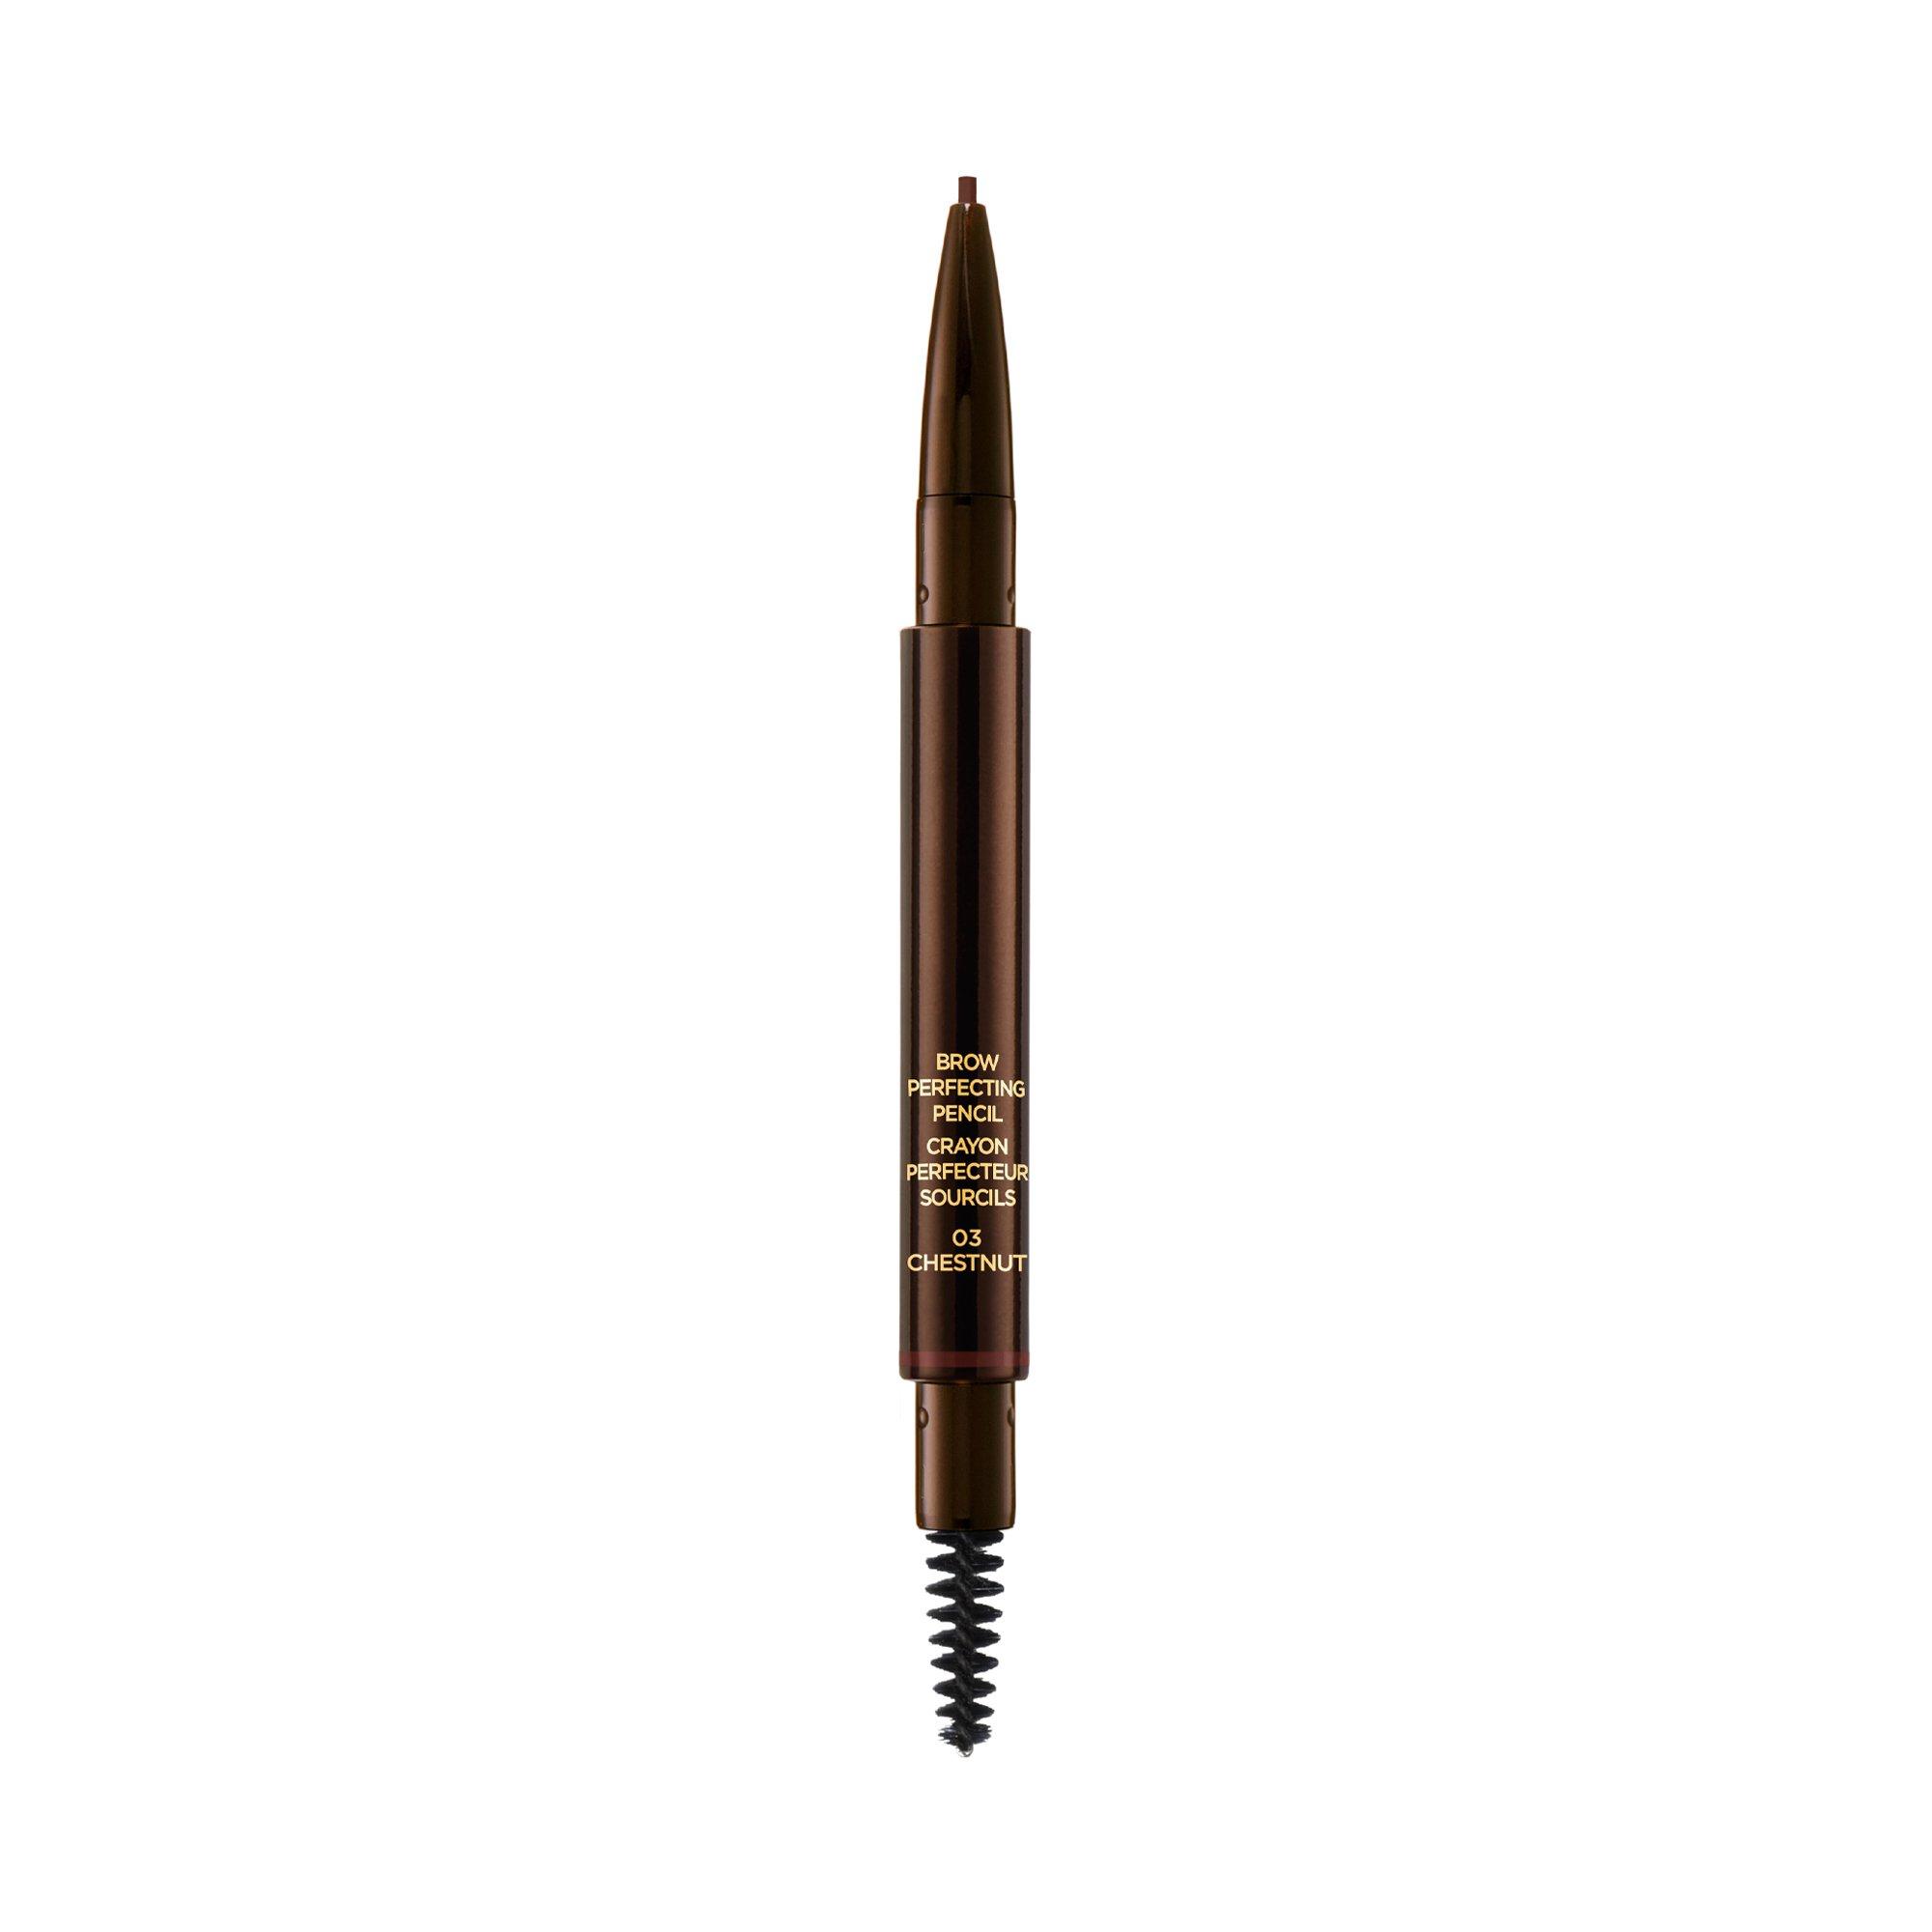 Image of TOM FORD Brow Perfecting Pencil